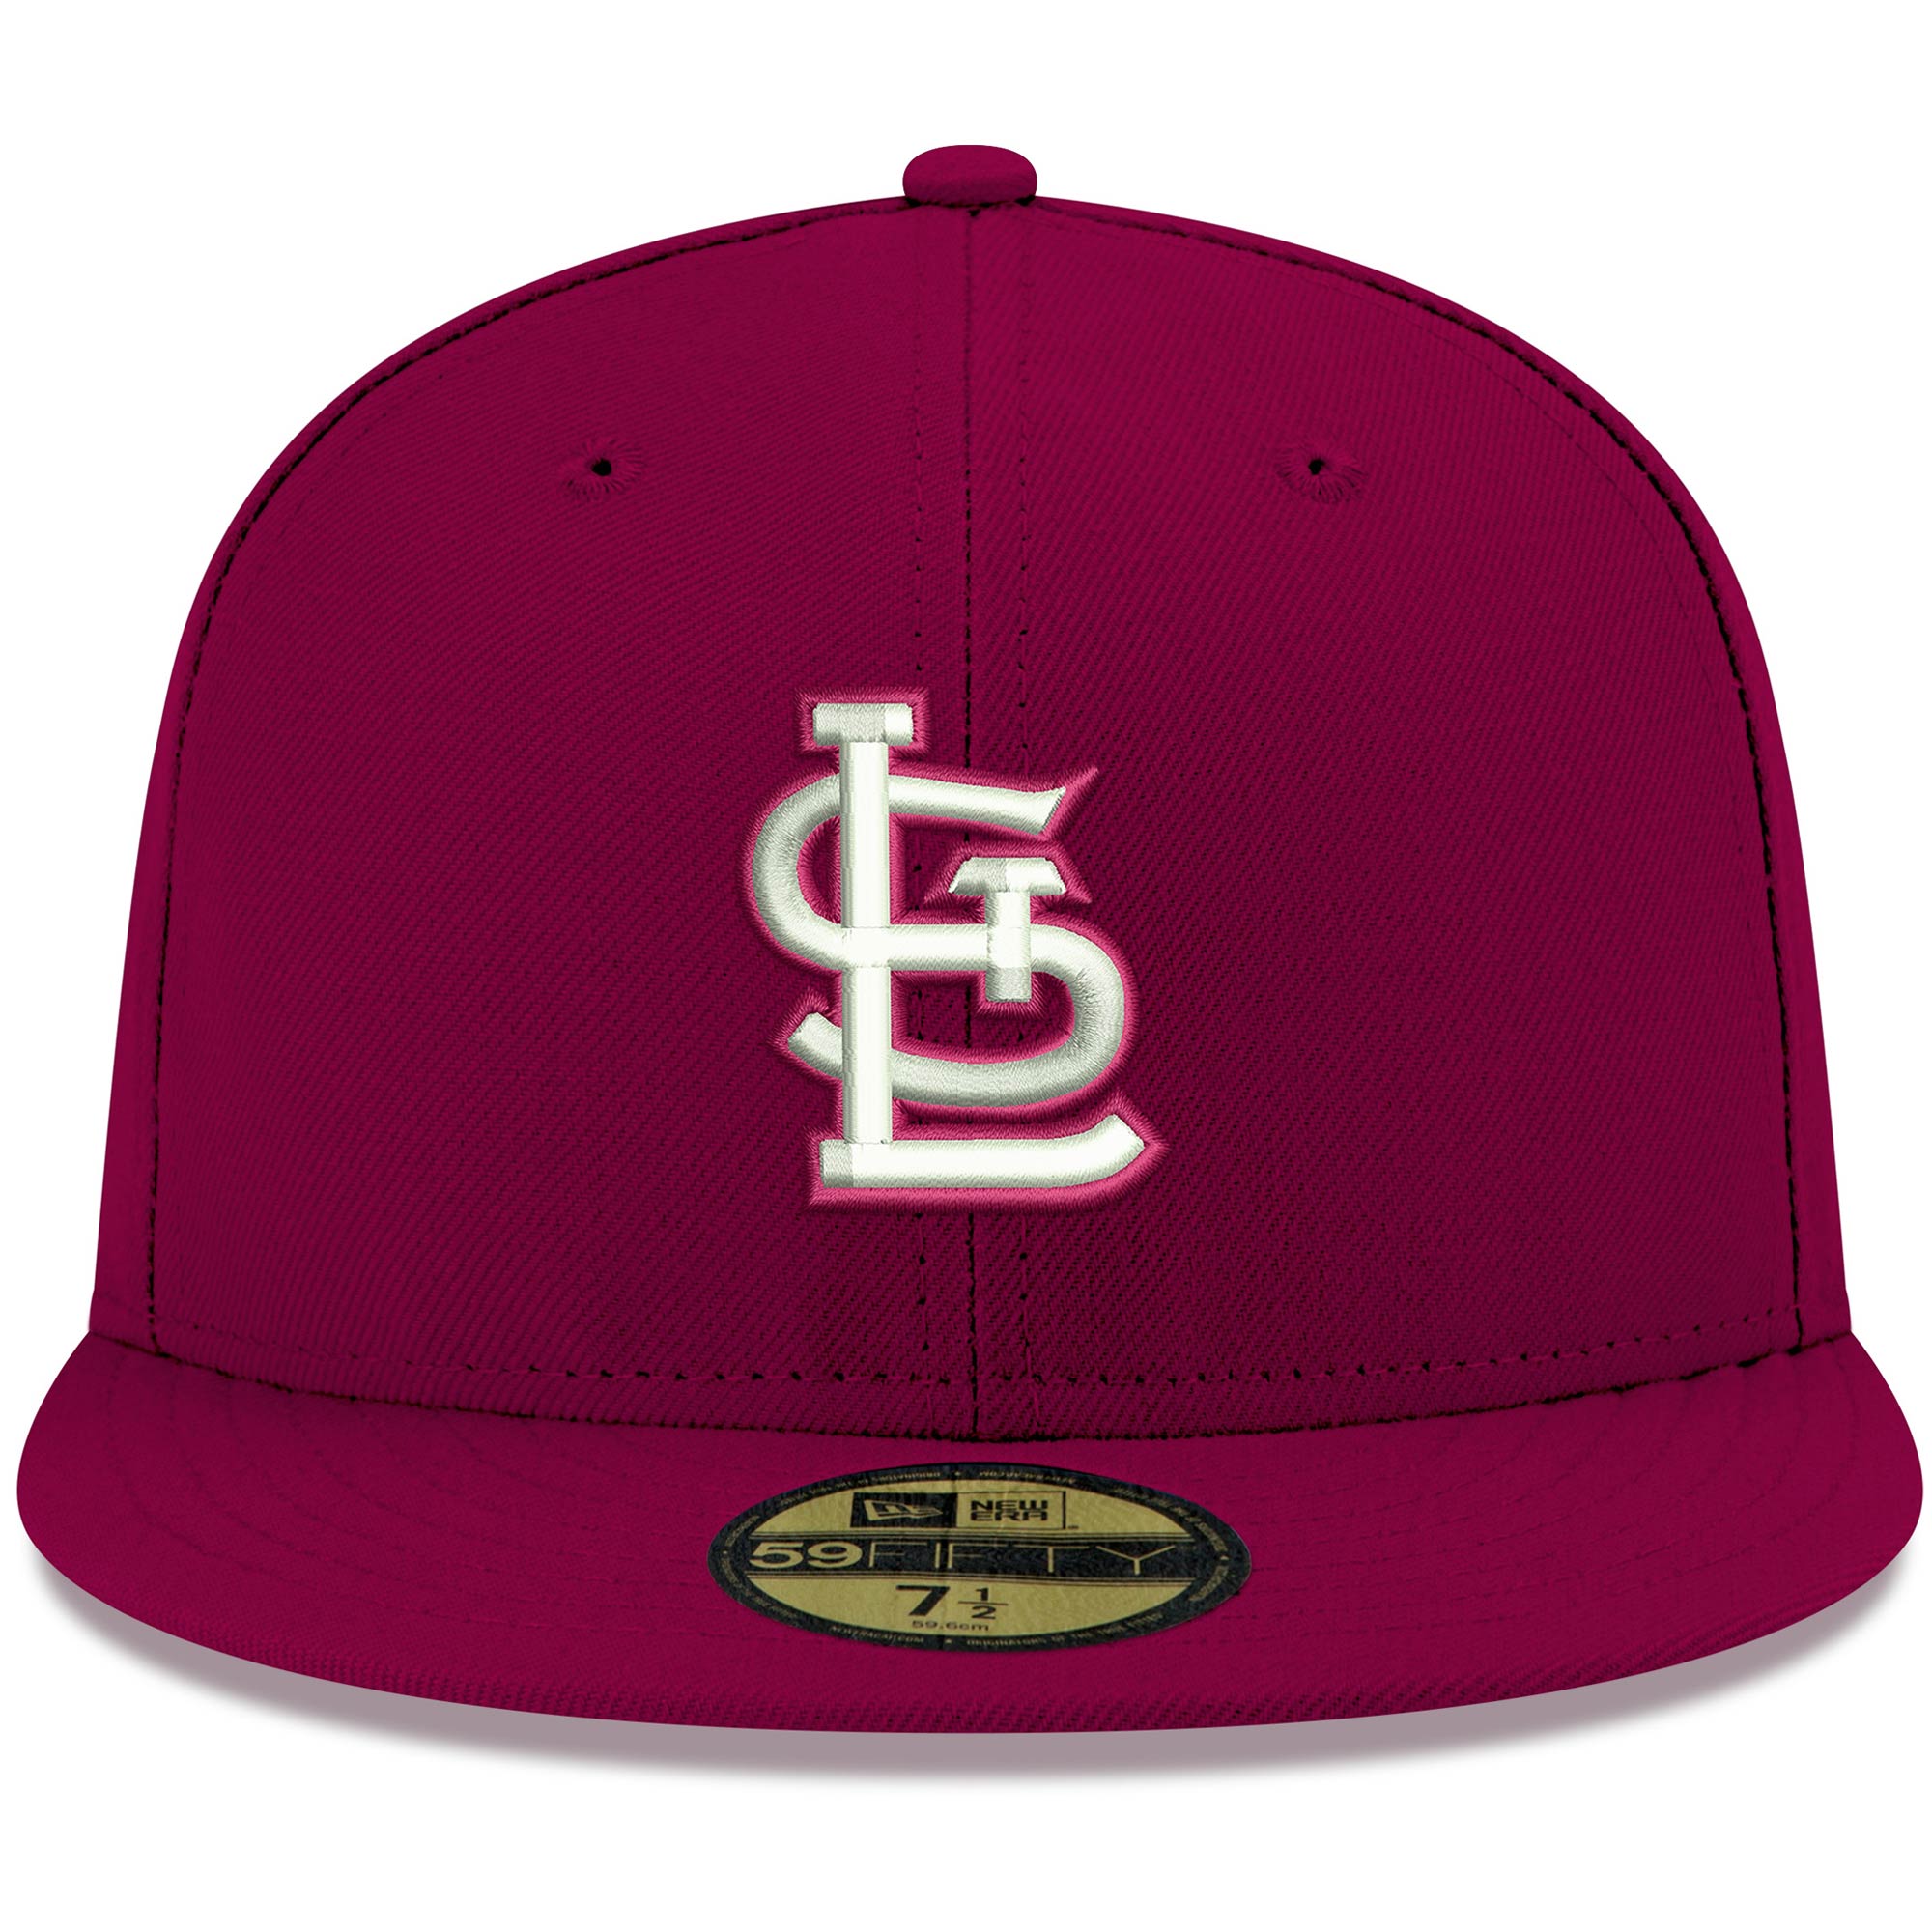 Men's New Era Cardinal St. Louis Cardinals White Logo 59FIFTY Fitted Hat - image 2 of 5